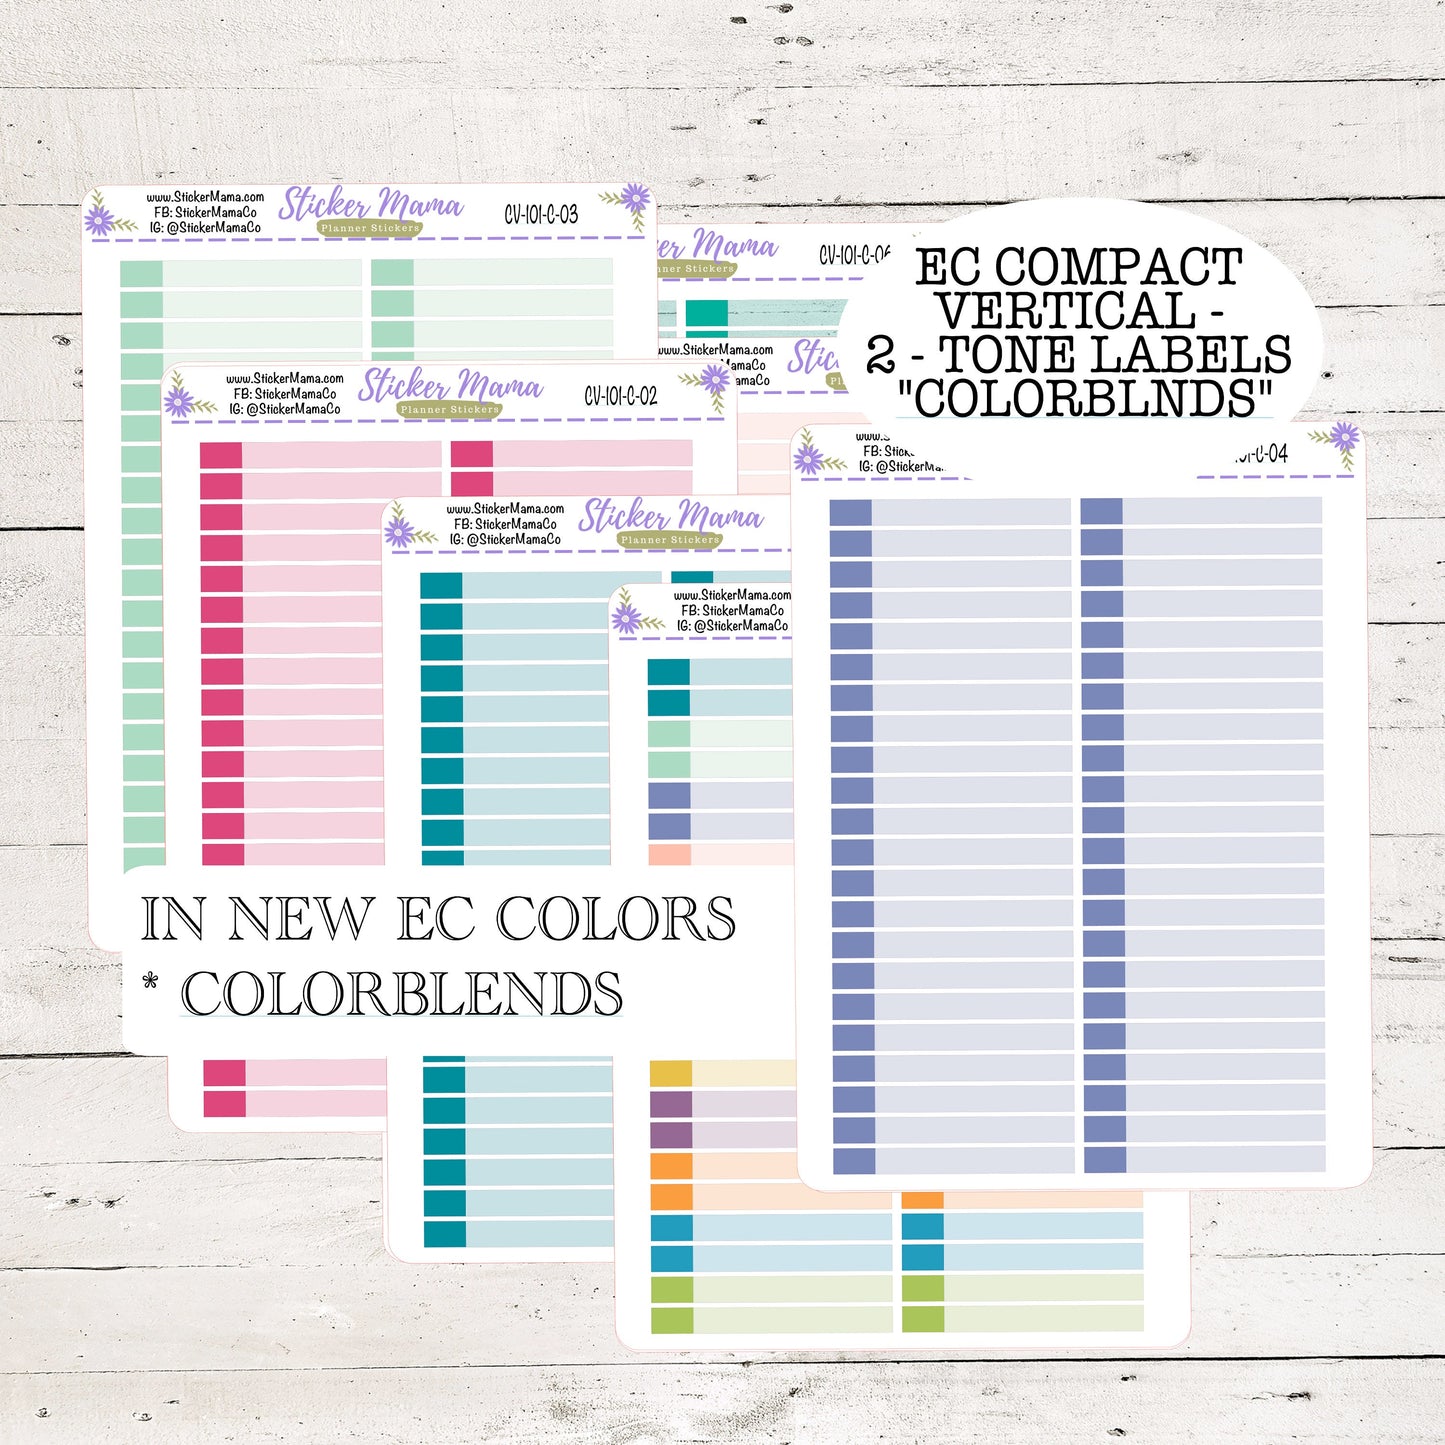 CV-101 TWO TONED Labels - Colorblend Erin Condren Compact Vertical - Bloom, Harmony, Harmony Neutral, Colorblends - Basic Labels - Planner